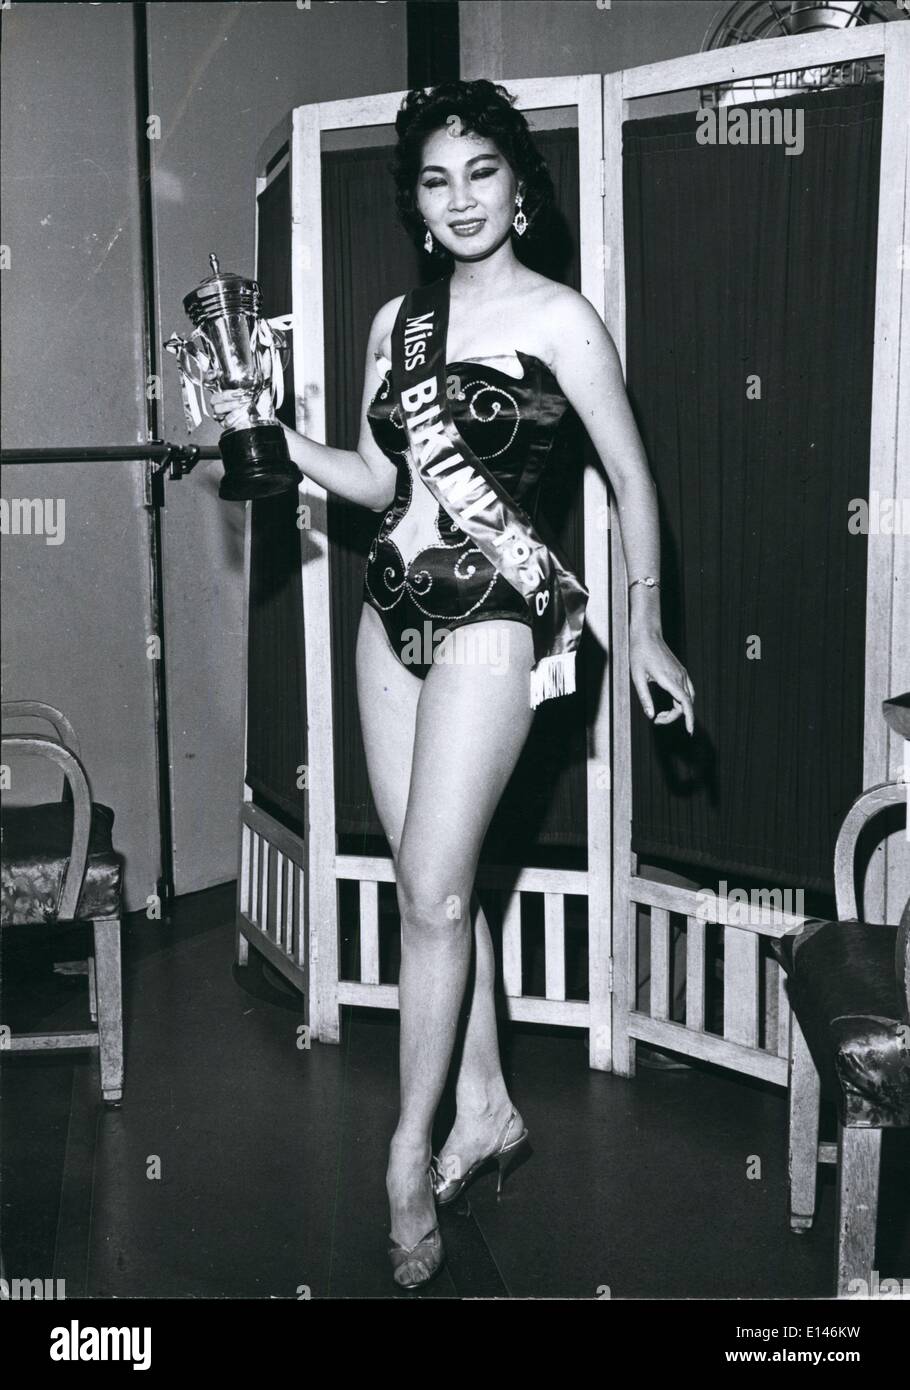 Apr. 16, 2012 - Singapore's Miss Bikini 1959: Miss Daisy Szeto age 22, was the winner of the Miss Bikini Contest held in Singapore. She will reign during 1959. Her vital statistics are 36-23-35, and she was born in Canton, China. Her bathing suit has a built in air vent in the front covered by a net 'window' giving a view of her tummy. Stock Photo